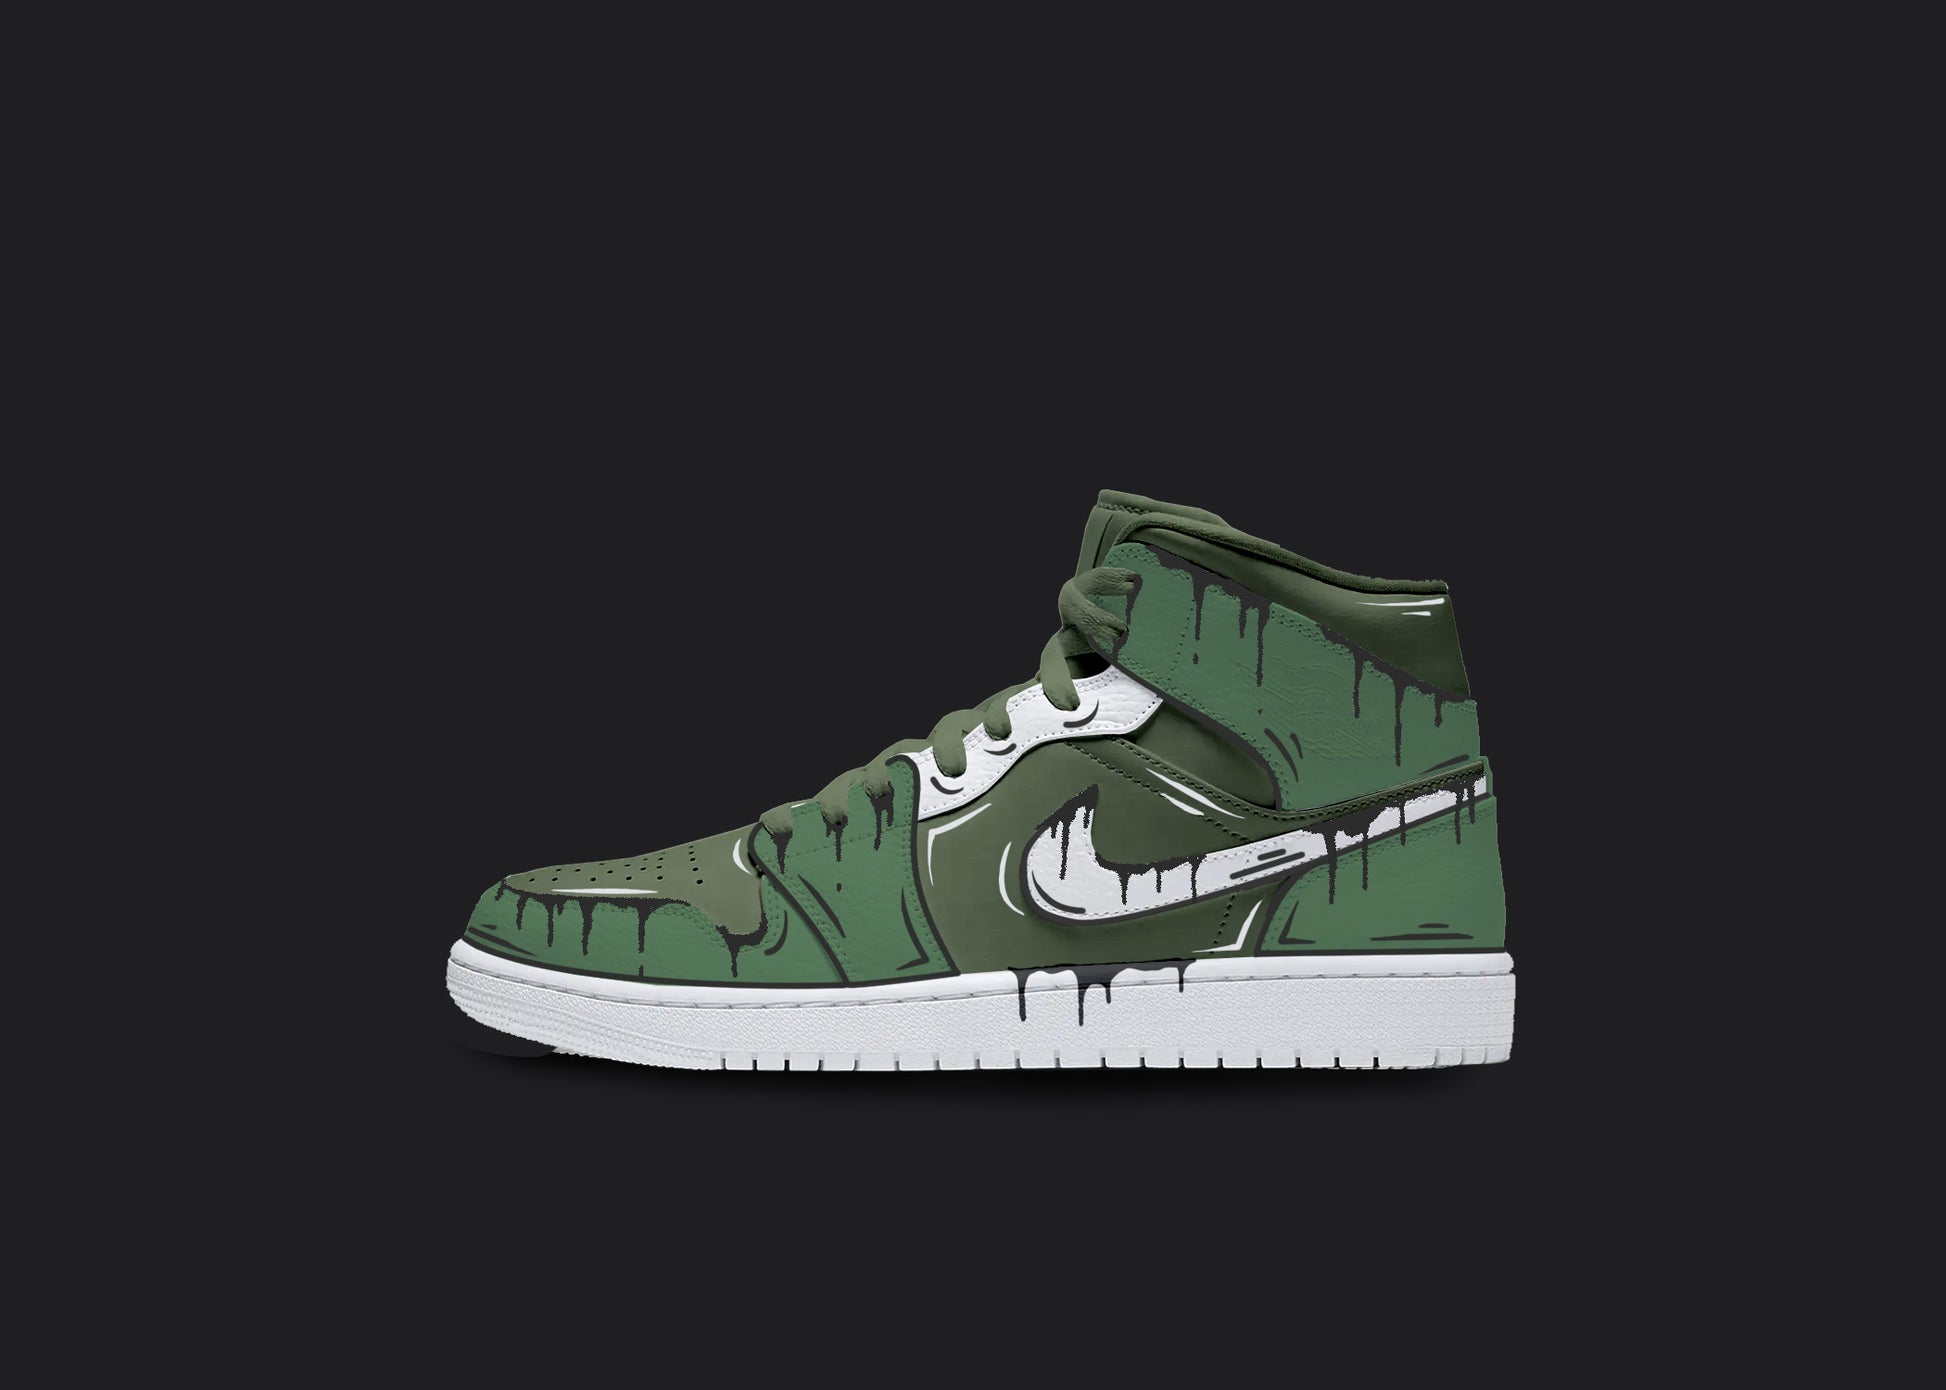 The image is featuring a custom black Air Jordan 1 sneaker on a blank black background. The white jordan sneaker has a custom green on green cartoon design all over the sneaker. 